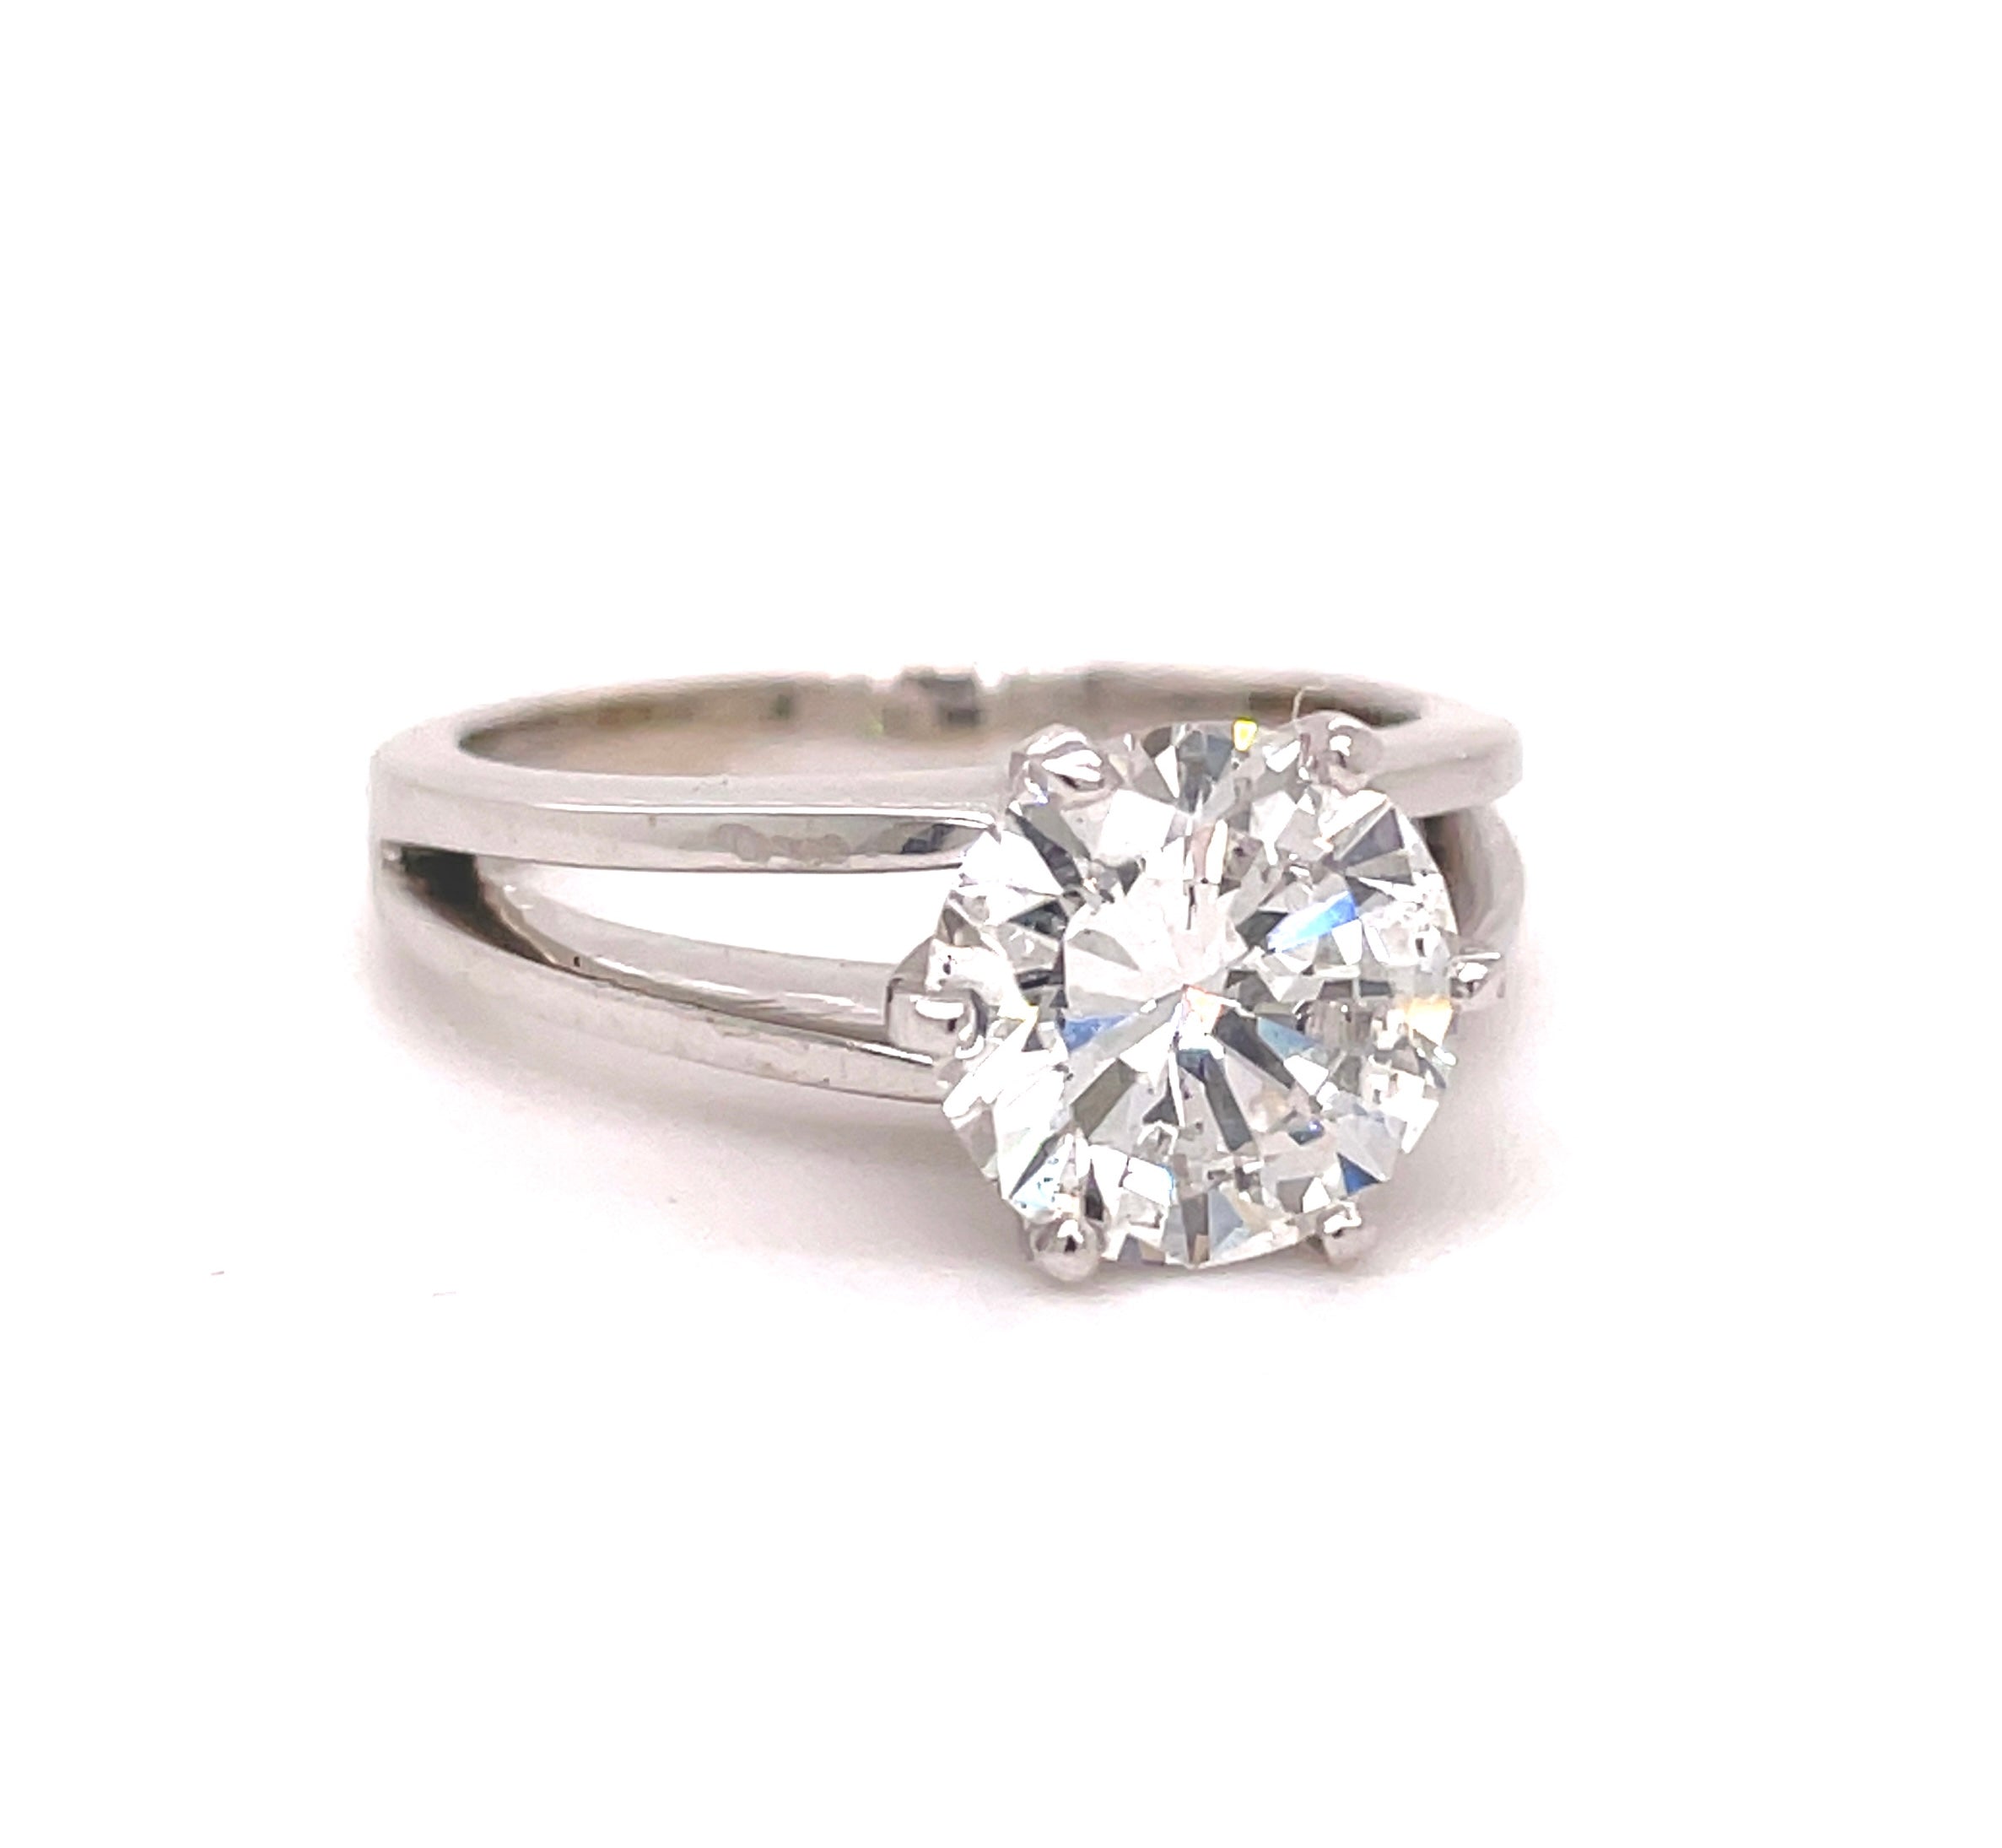 This breathtaking diamond is 2.32 cts, brilliant cut, Color H, Clarity SI1  and is set in an 18k white gold six-pronged split shank, crafted to perfection. It is a sublime & sophisticated addition to your collection.